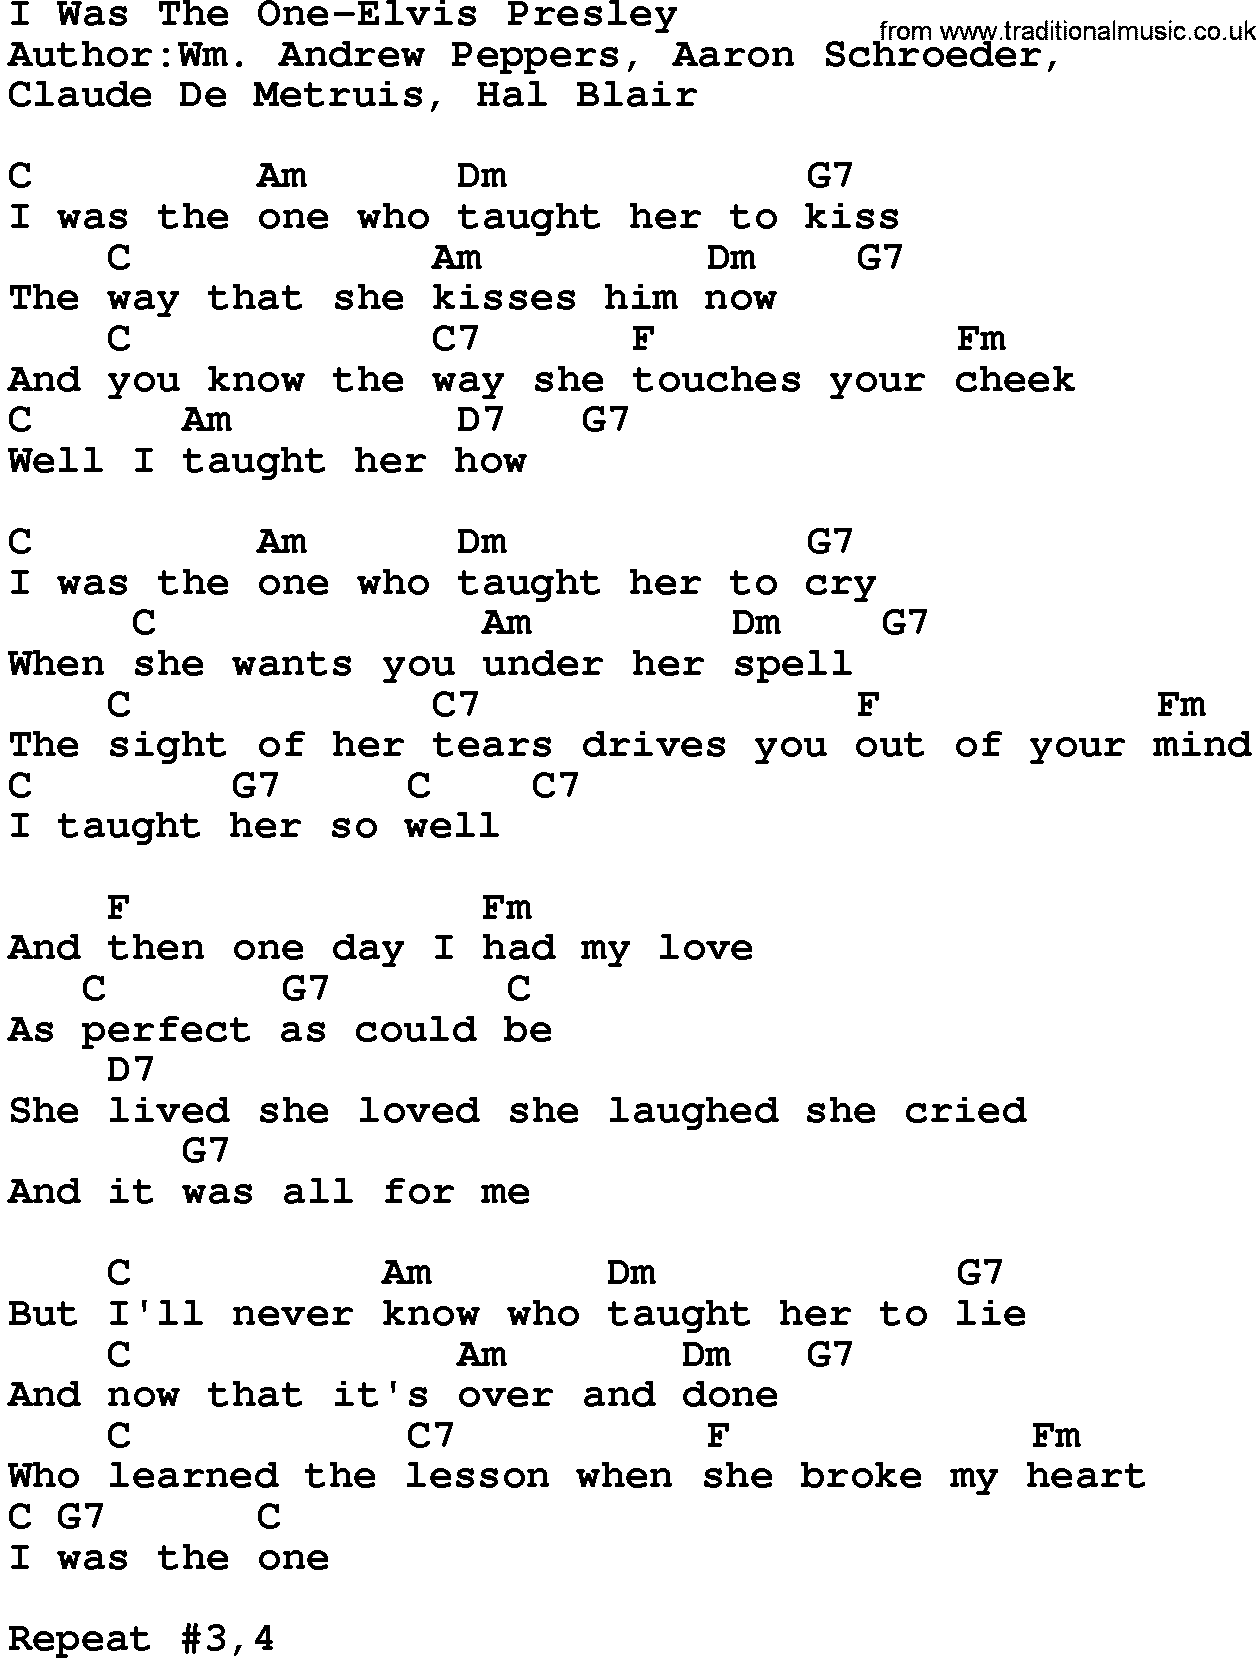 Country music song: I Was The One-Elvis Presley lyrics and chords